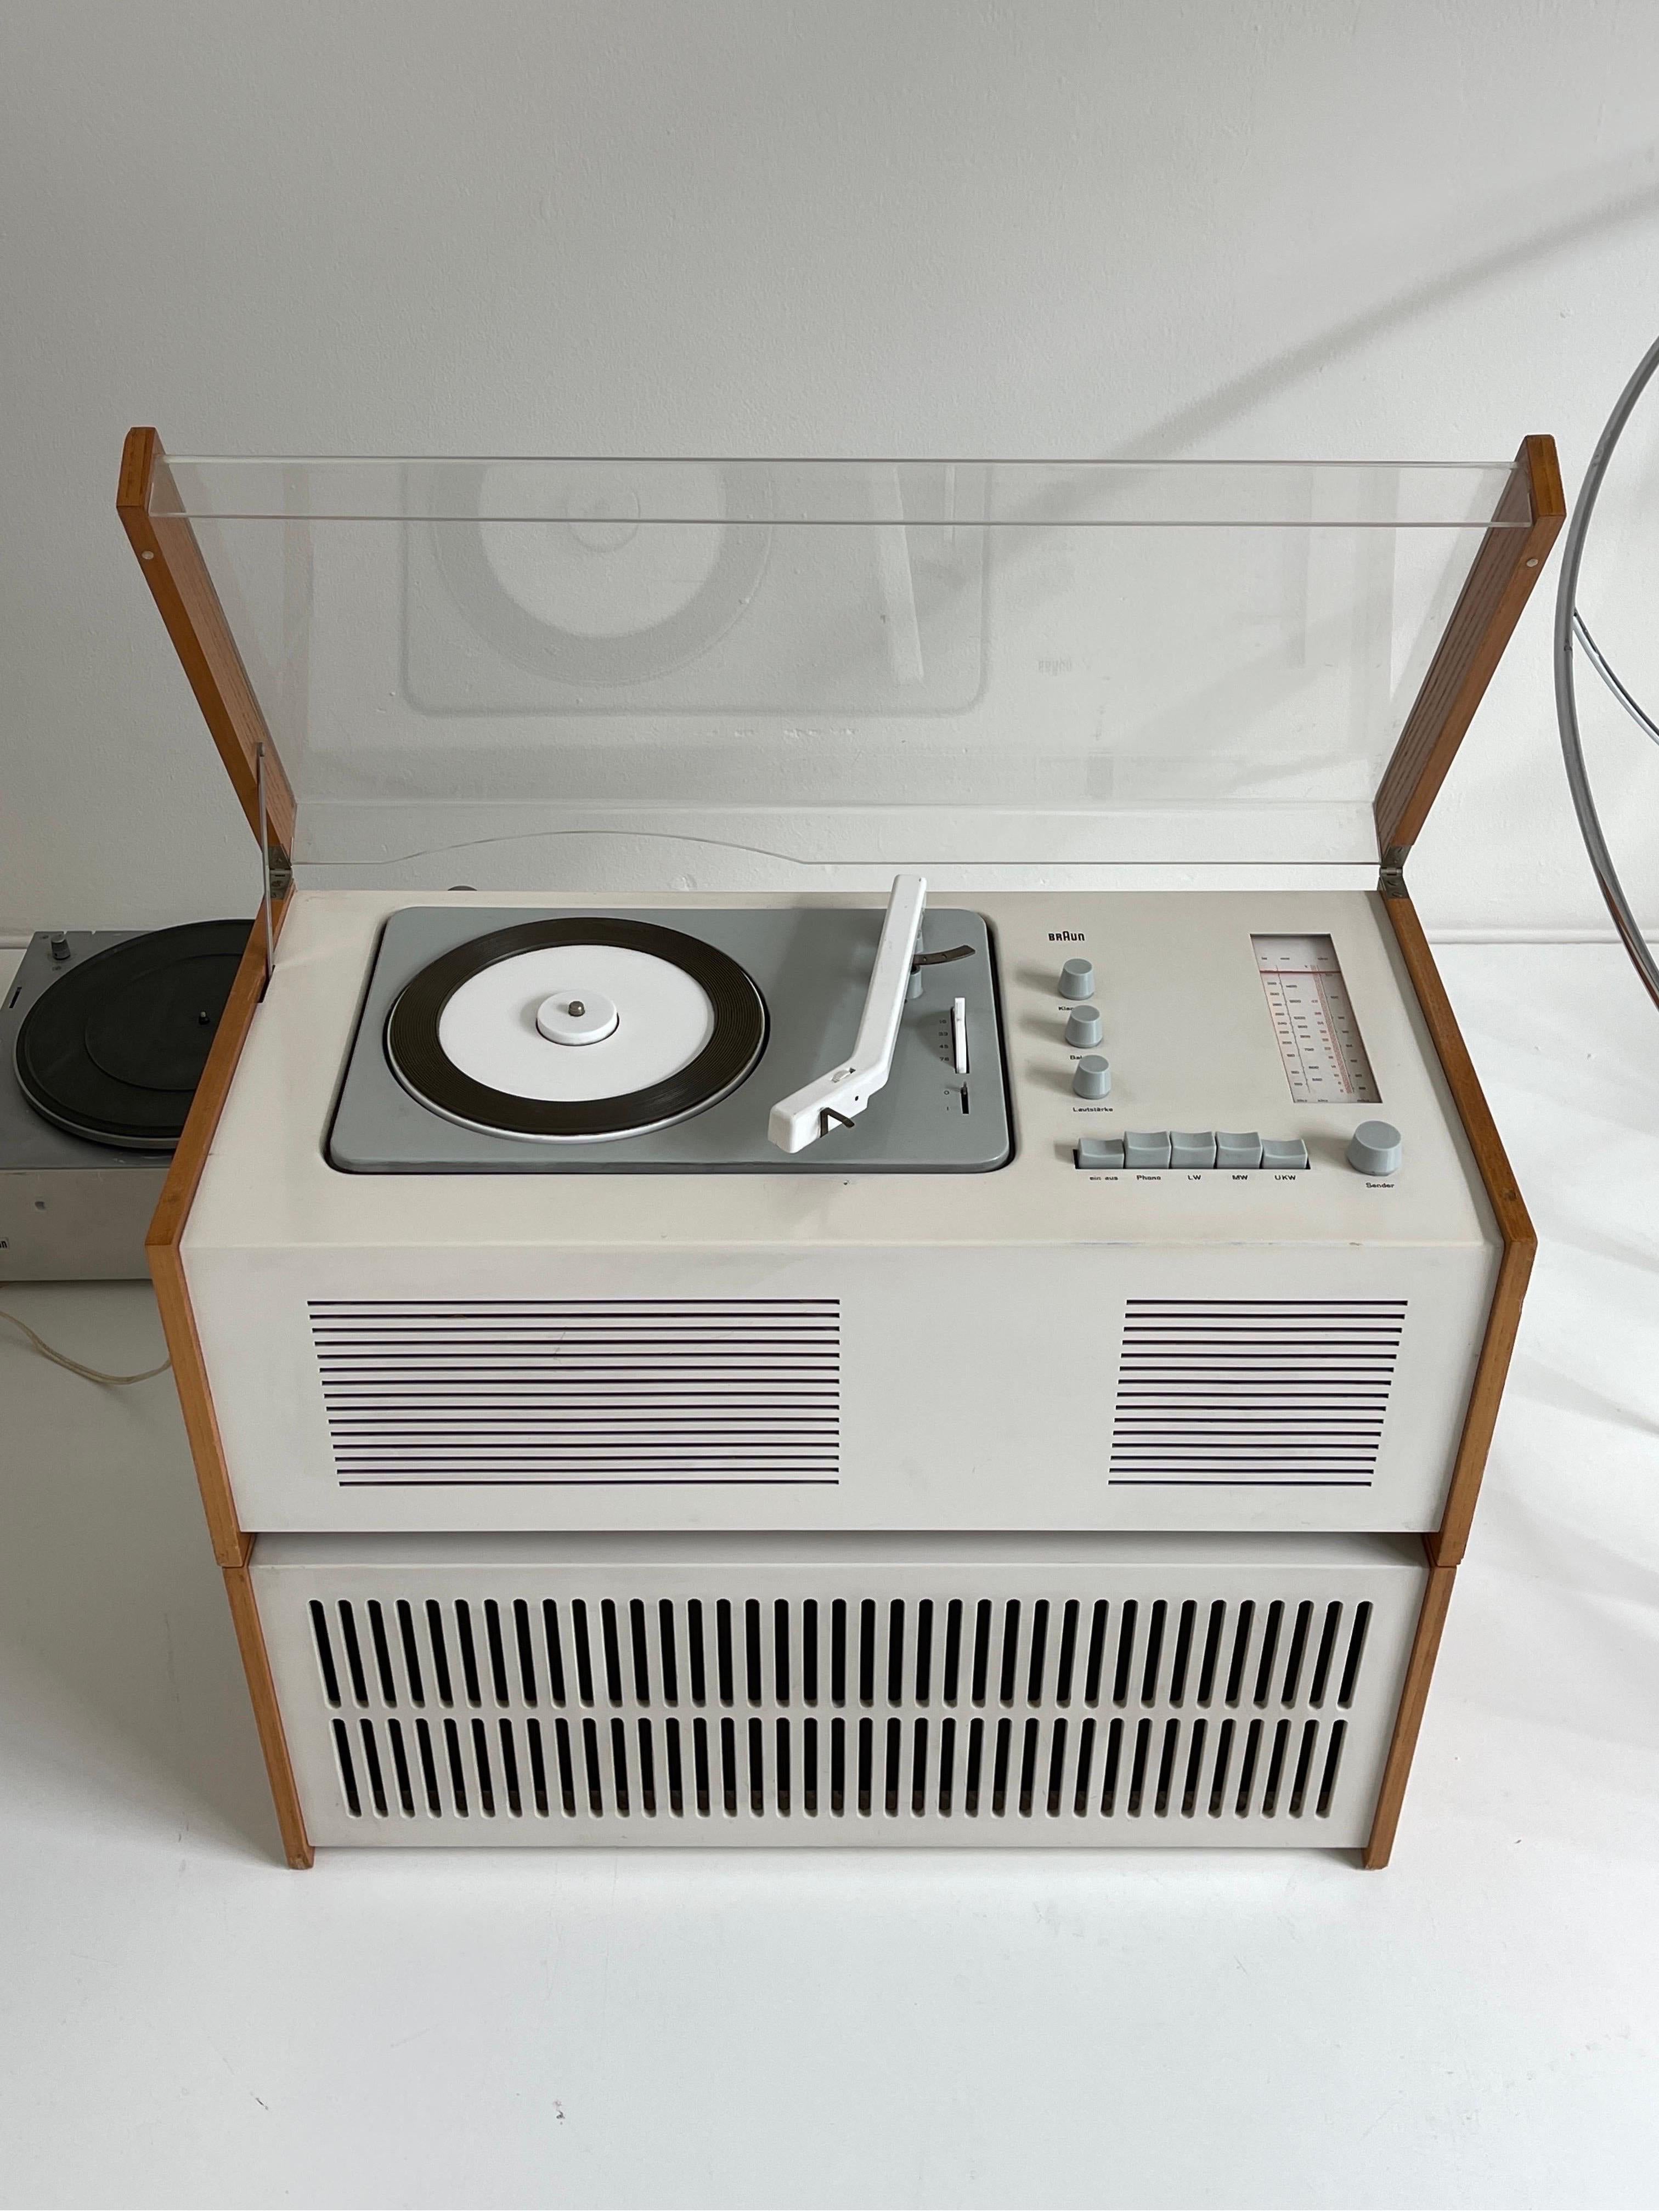 Braun SK61 record player designed by Dieter Rams and Hans Hugelot, 1961. Equip with record player and AM/FM radio. 1950’s Braun L1 speaker included. In good vintage condition. Fully functional and has been serviced by a technician. 